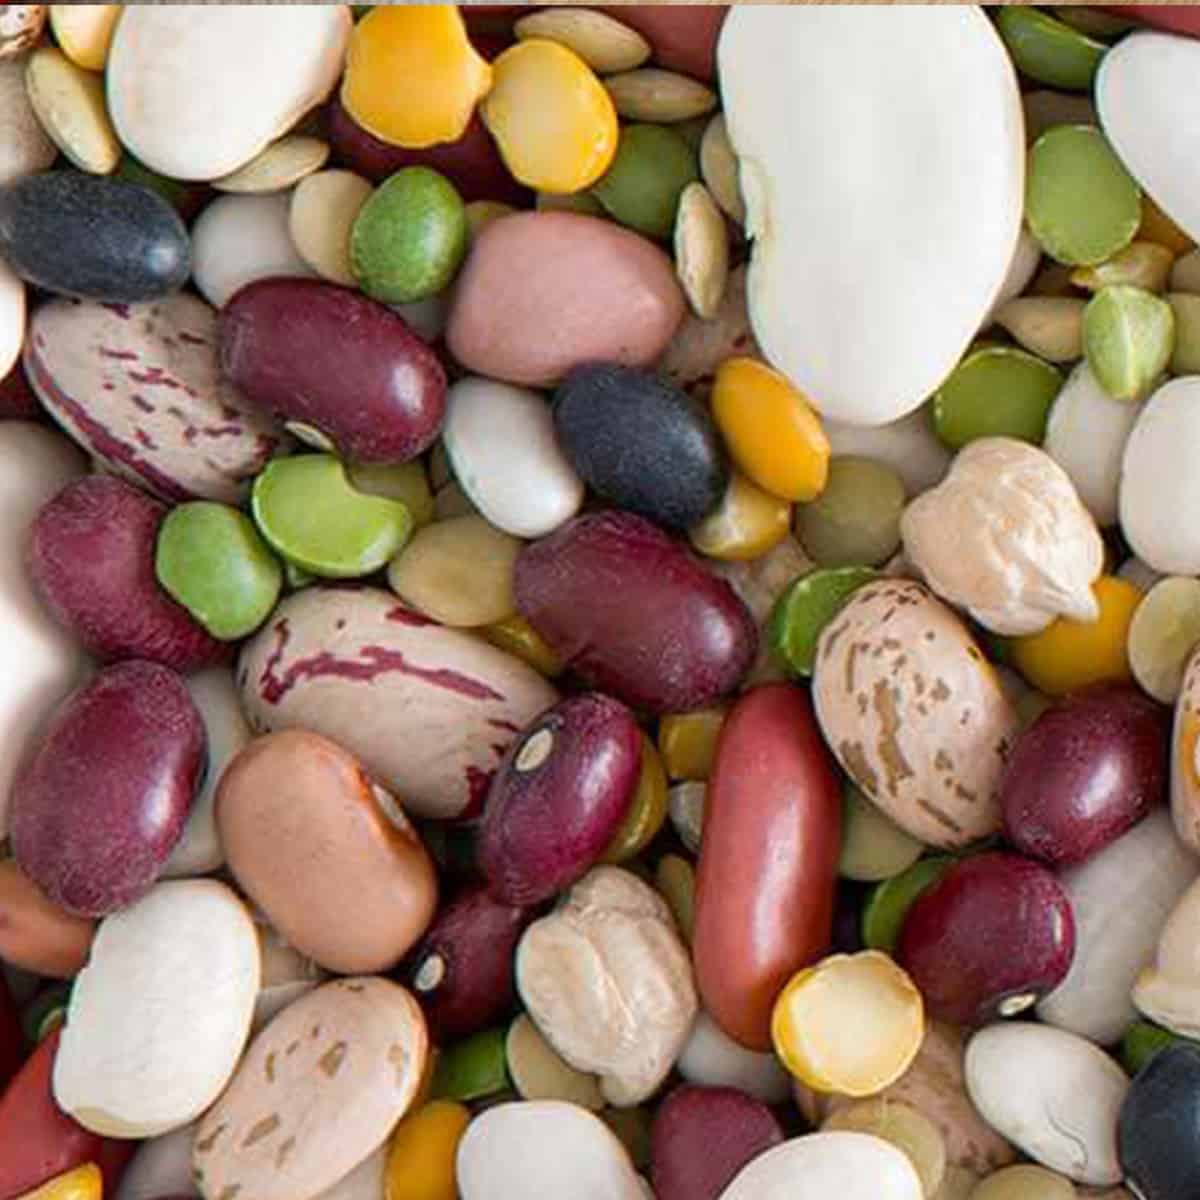 10 Creatives Ways to Use Beans in Food Storage – even if you hate them